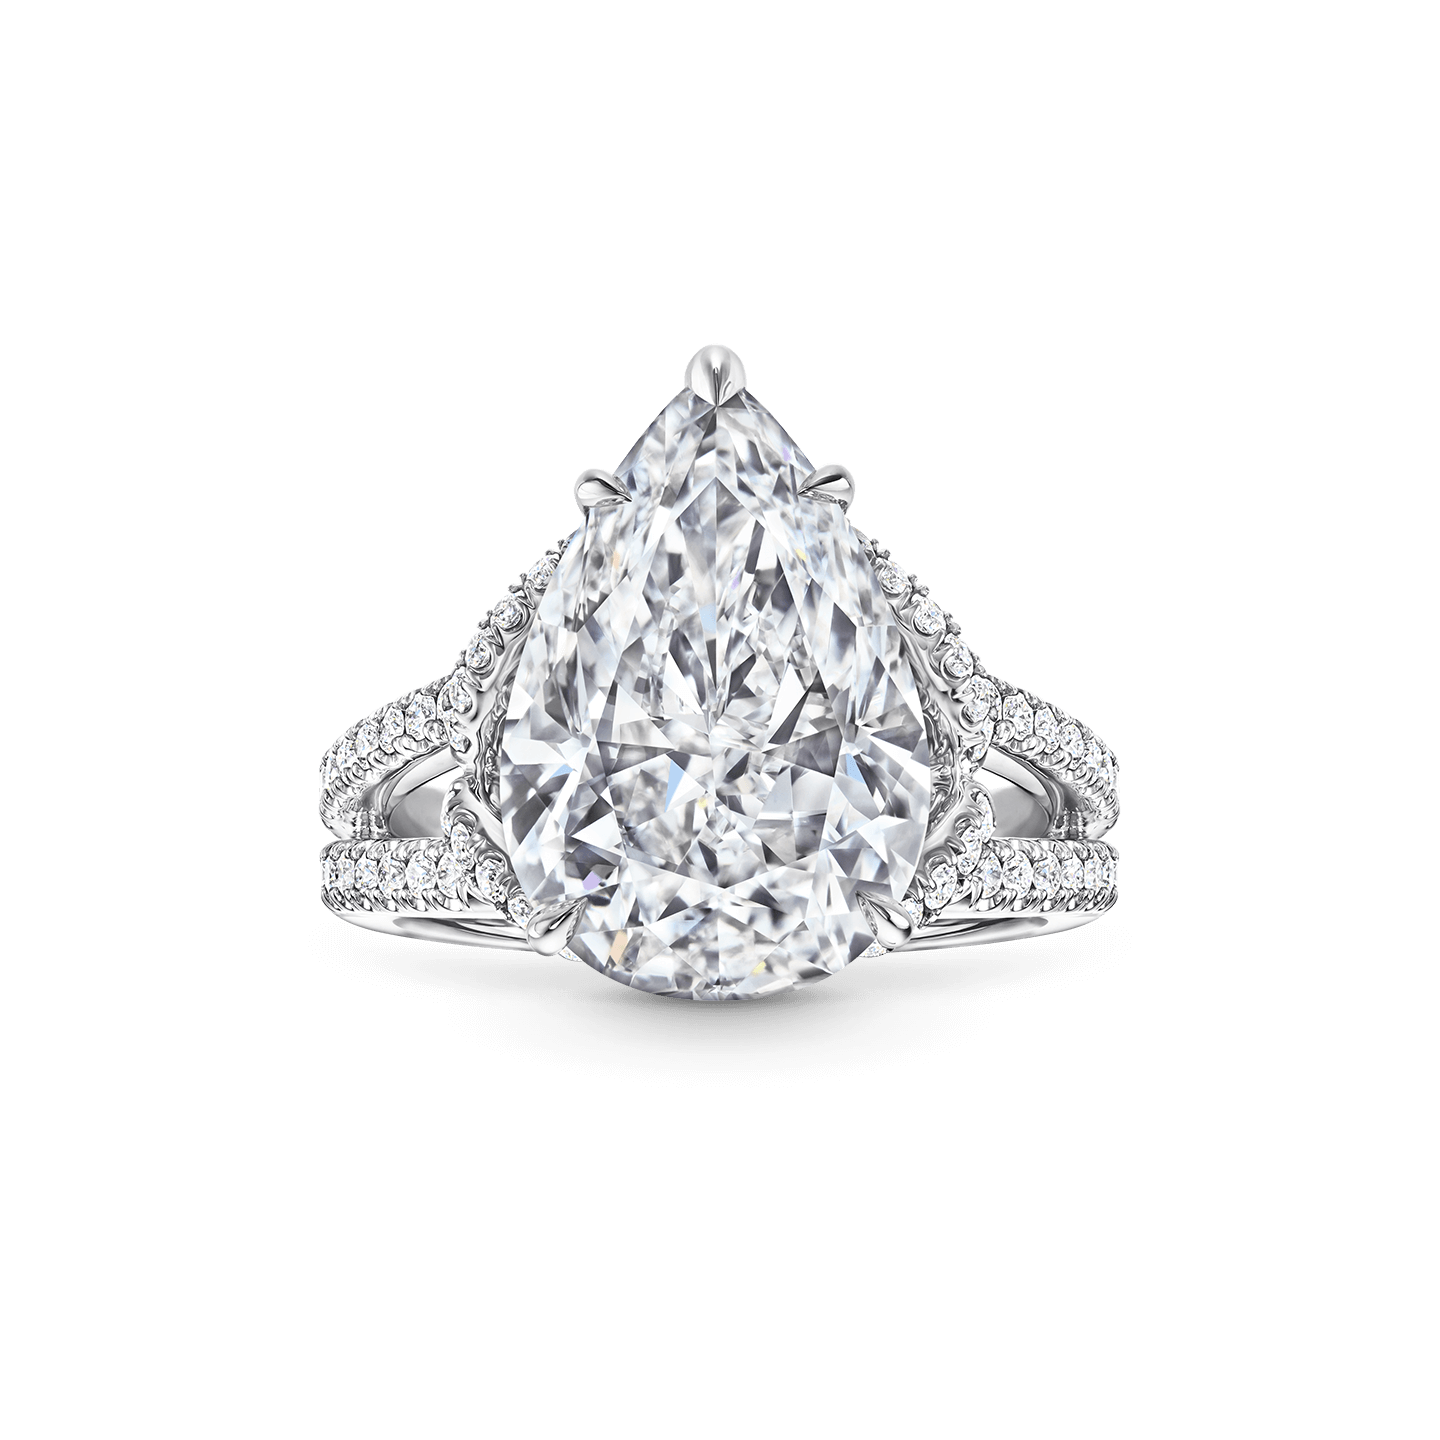 Front view of the Bridal Couture Pear-Shaped Diamond Engagement Ring